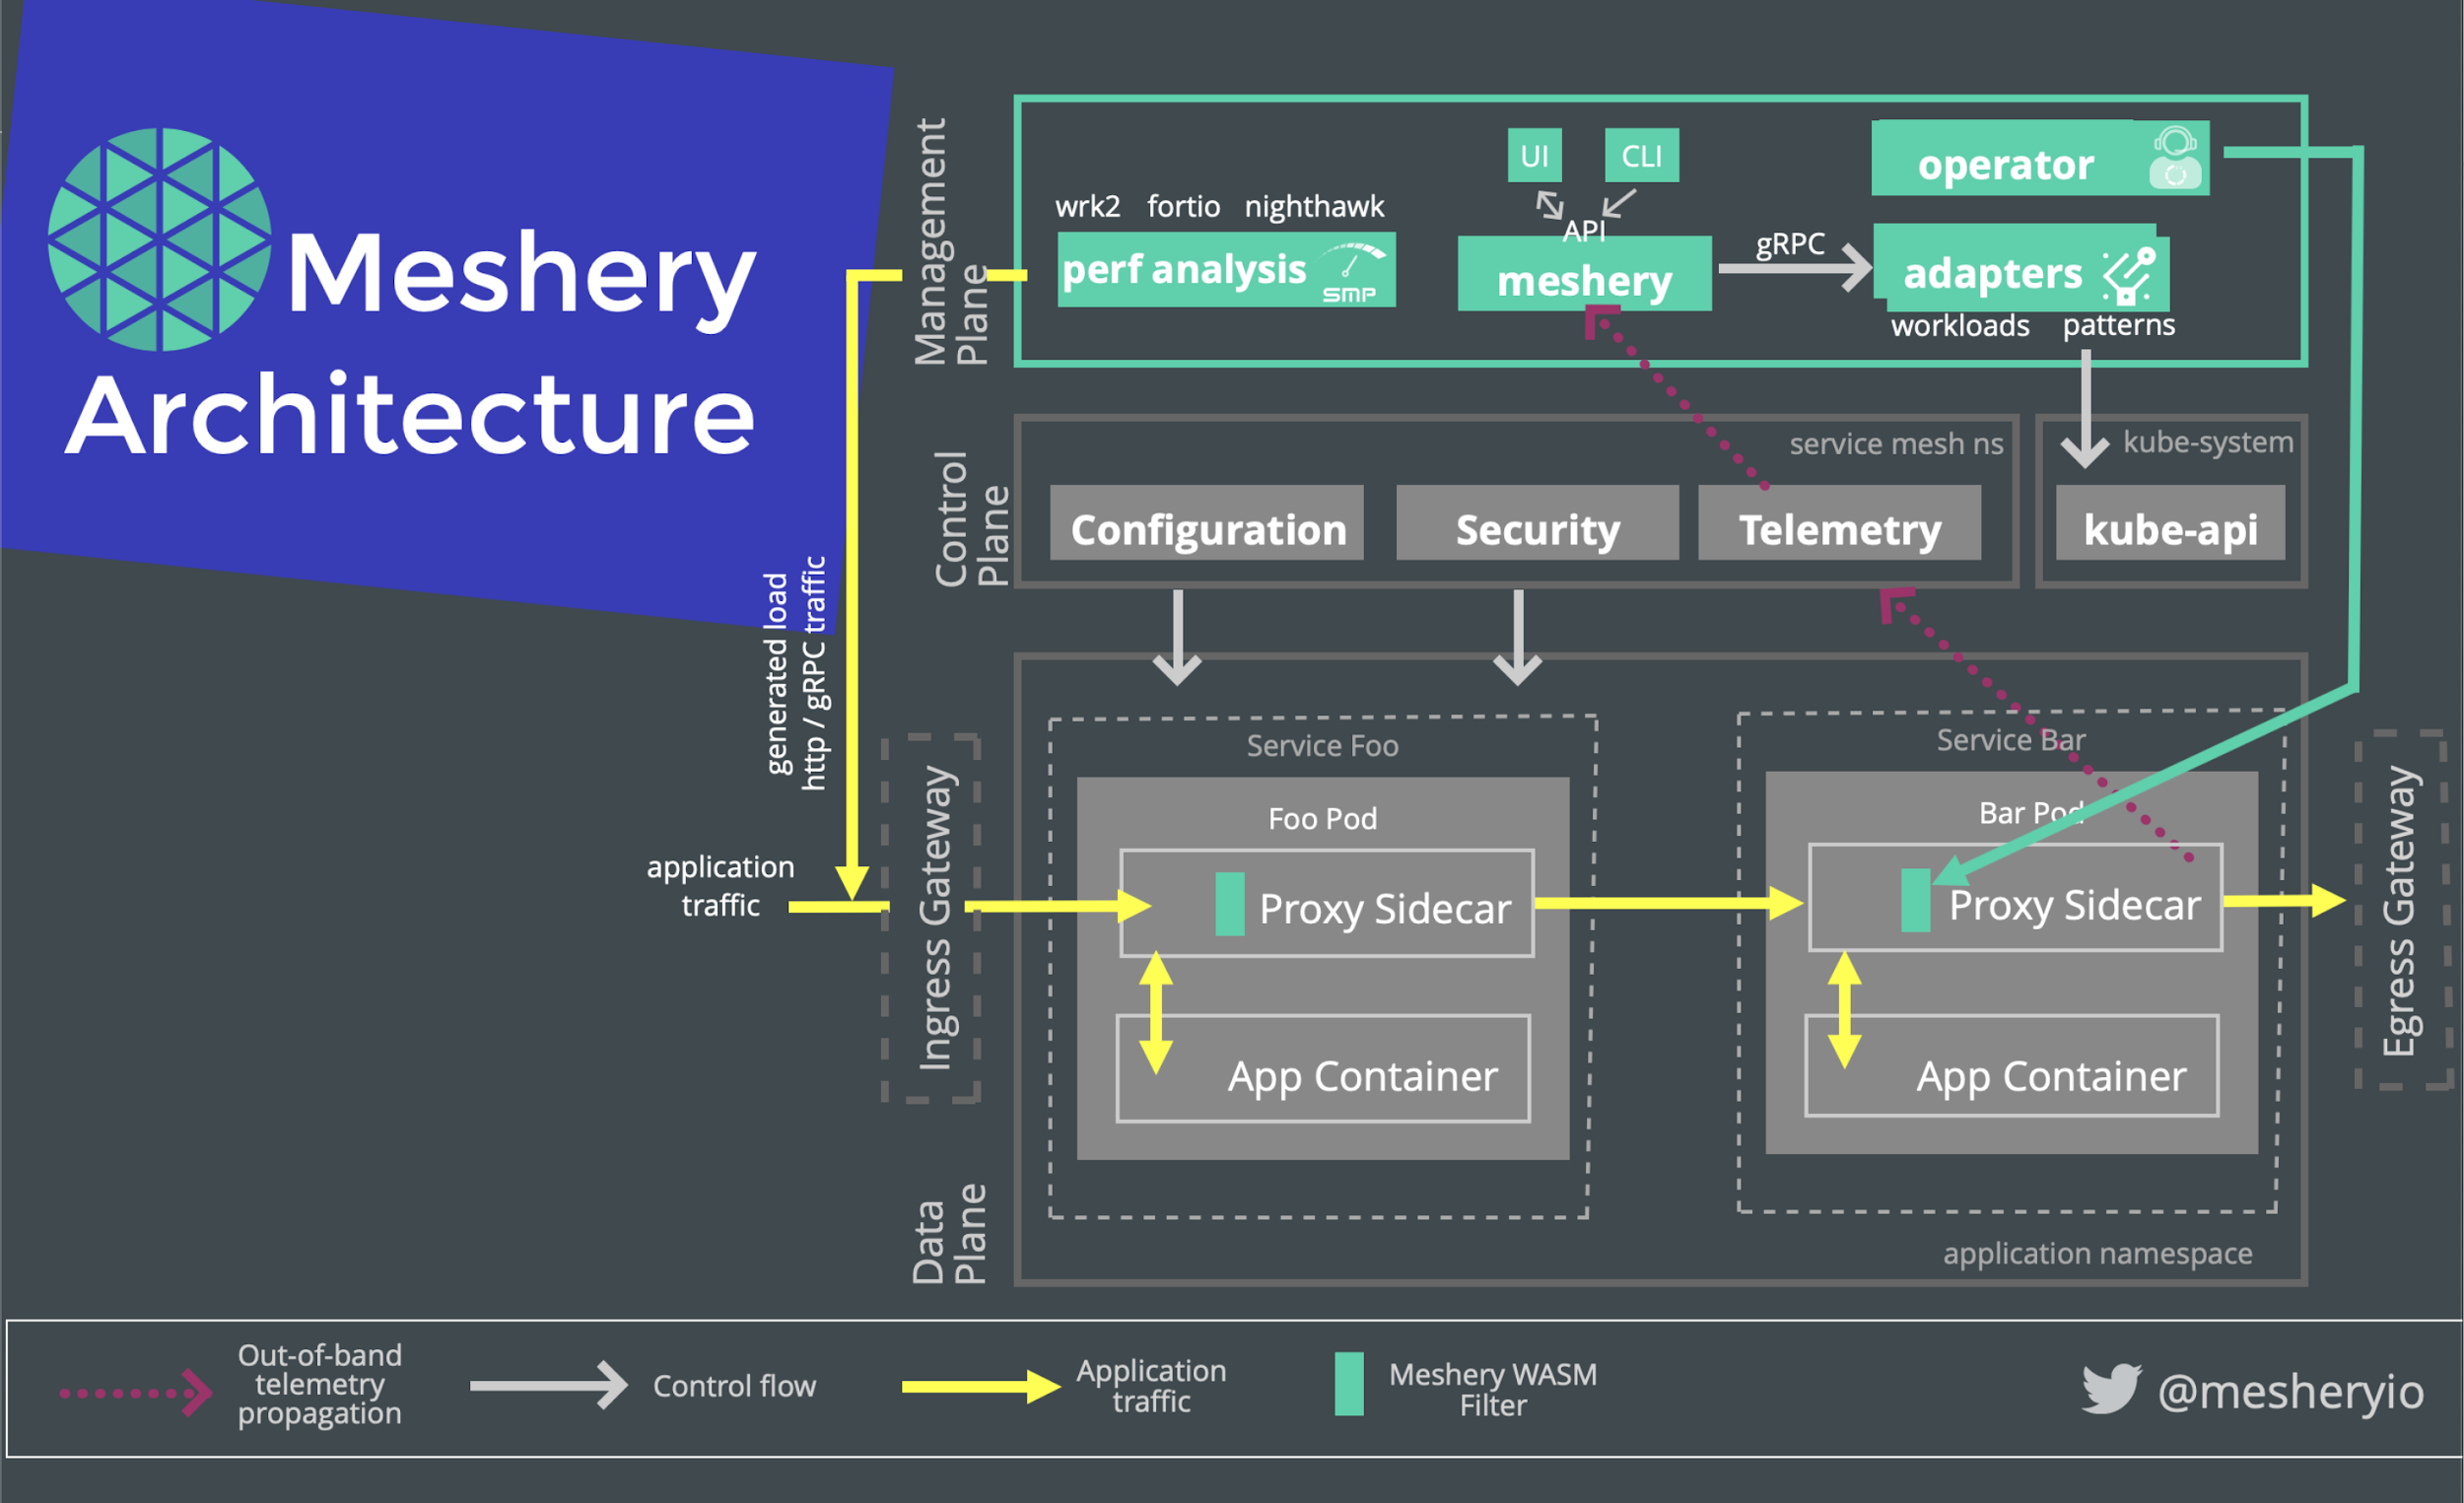 Architecture of Meshery  the service mesh management plane